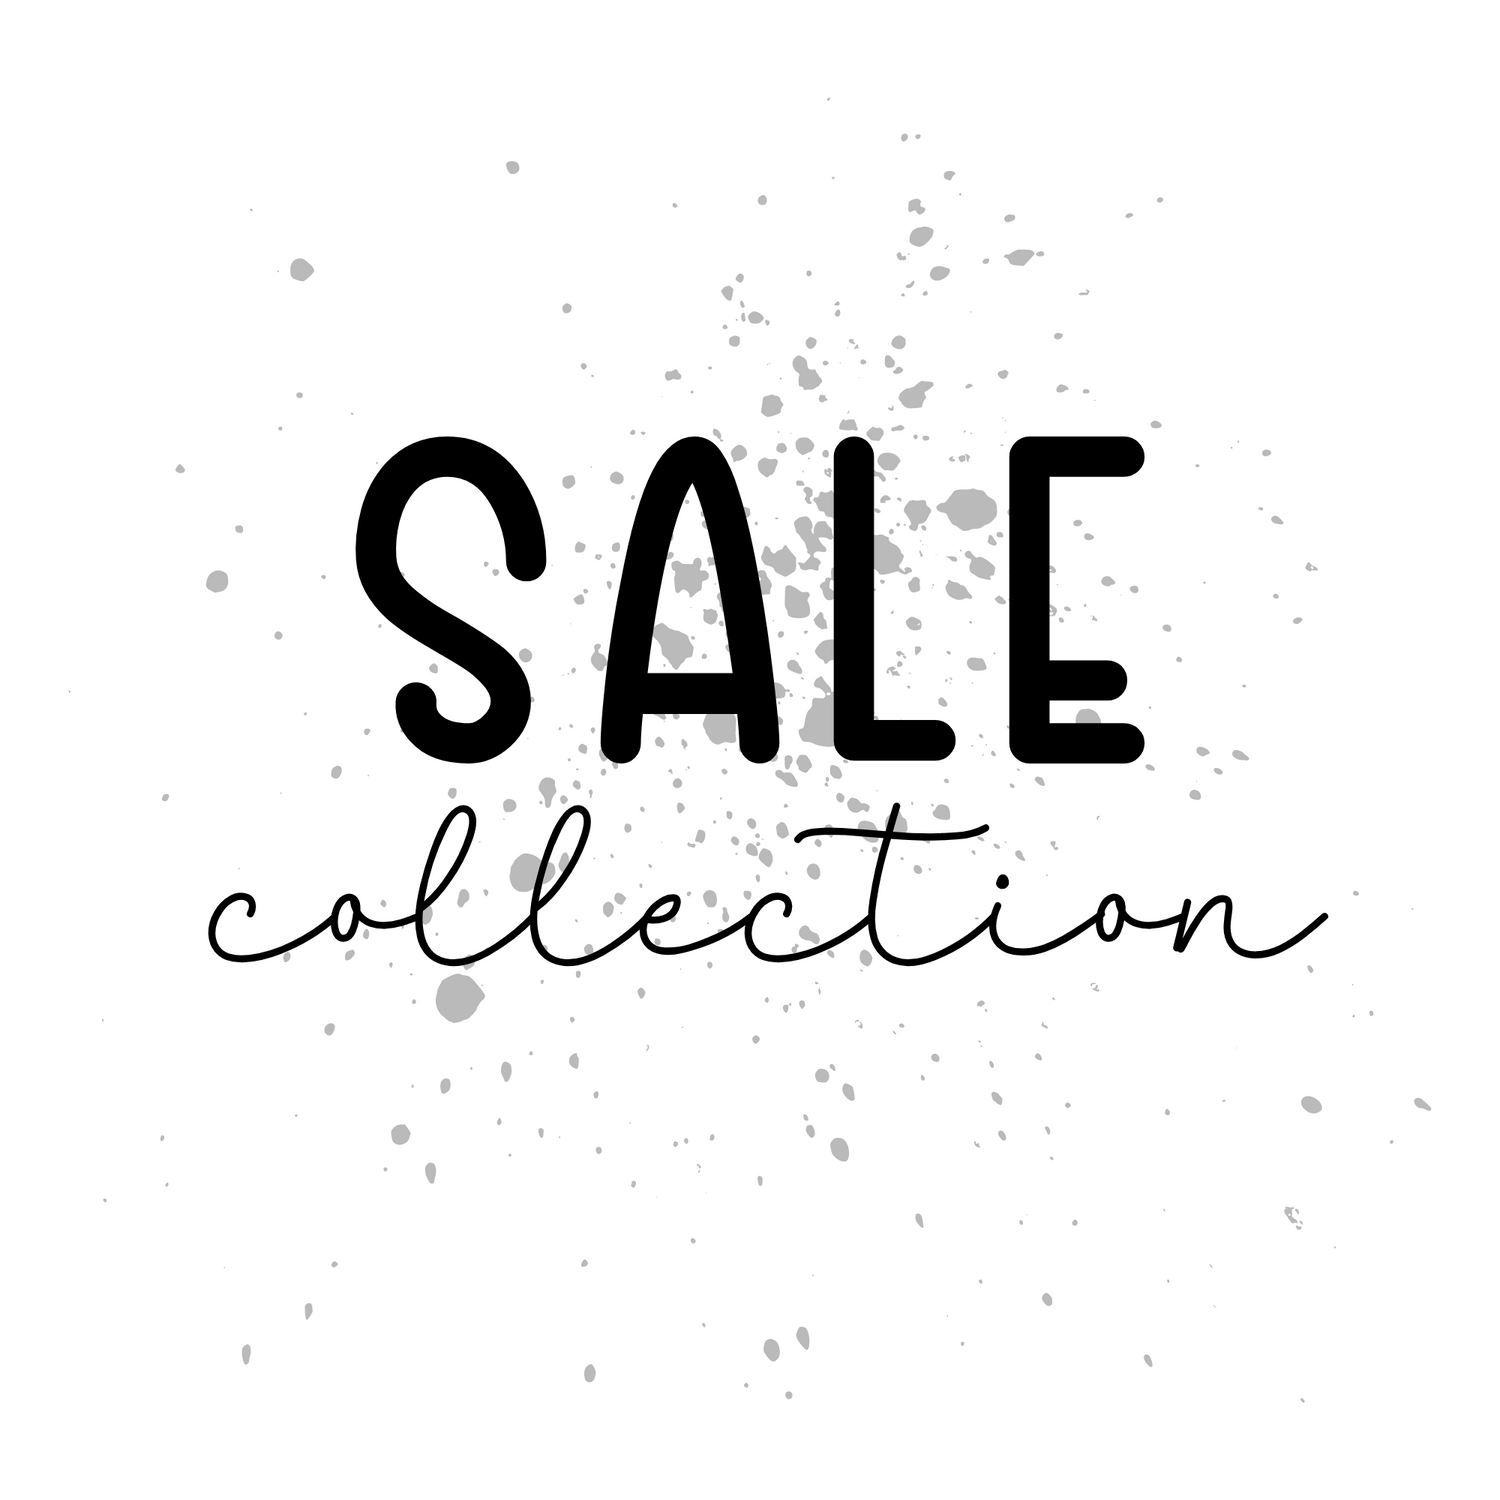 SALE COLLECTION